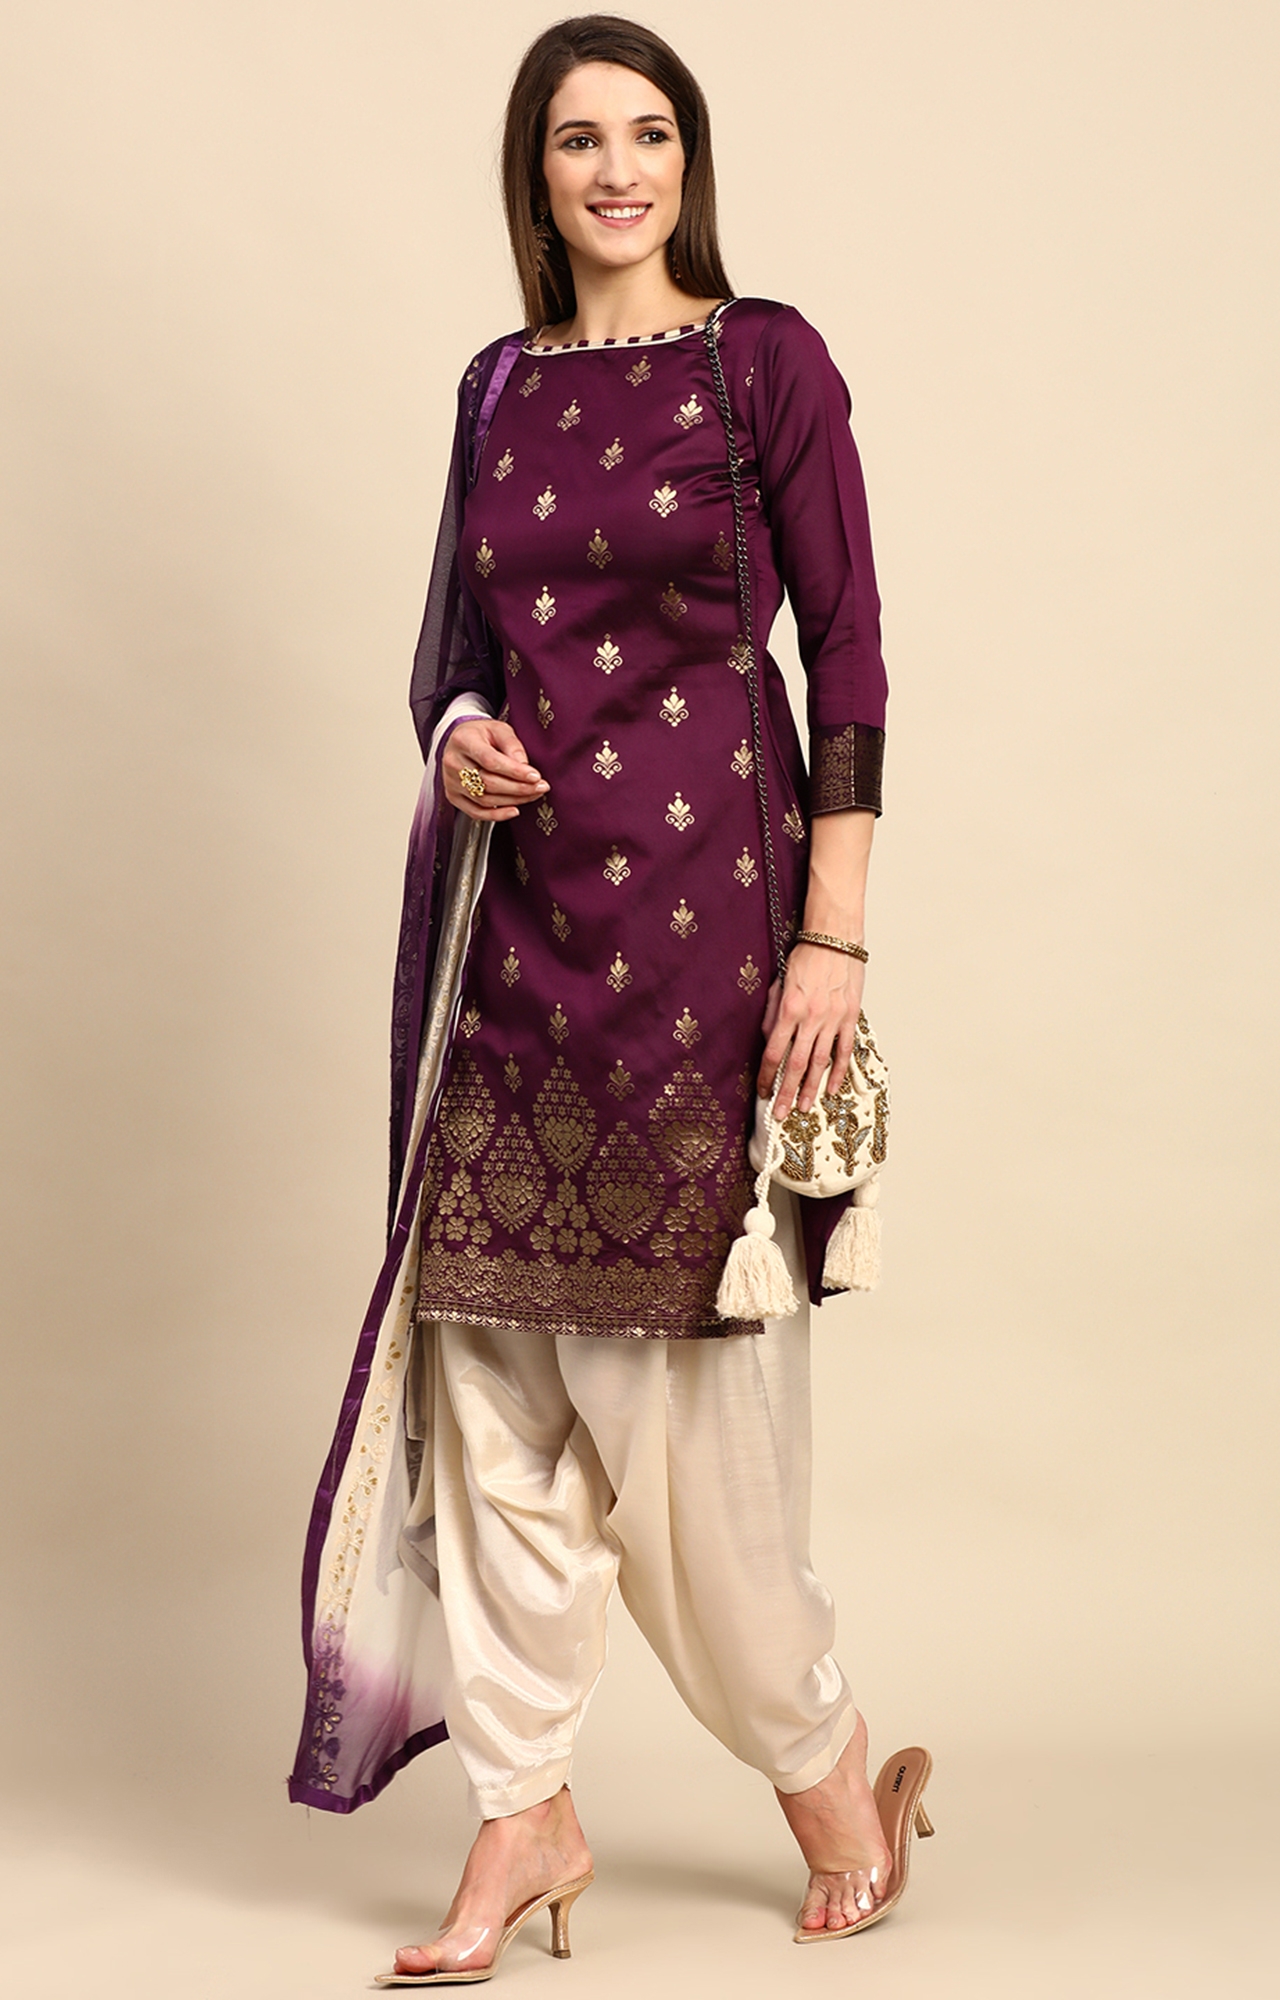 fcity.in - Unstitched Dress Material Ladies Suit Suit Material With Dupatta